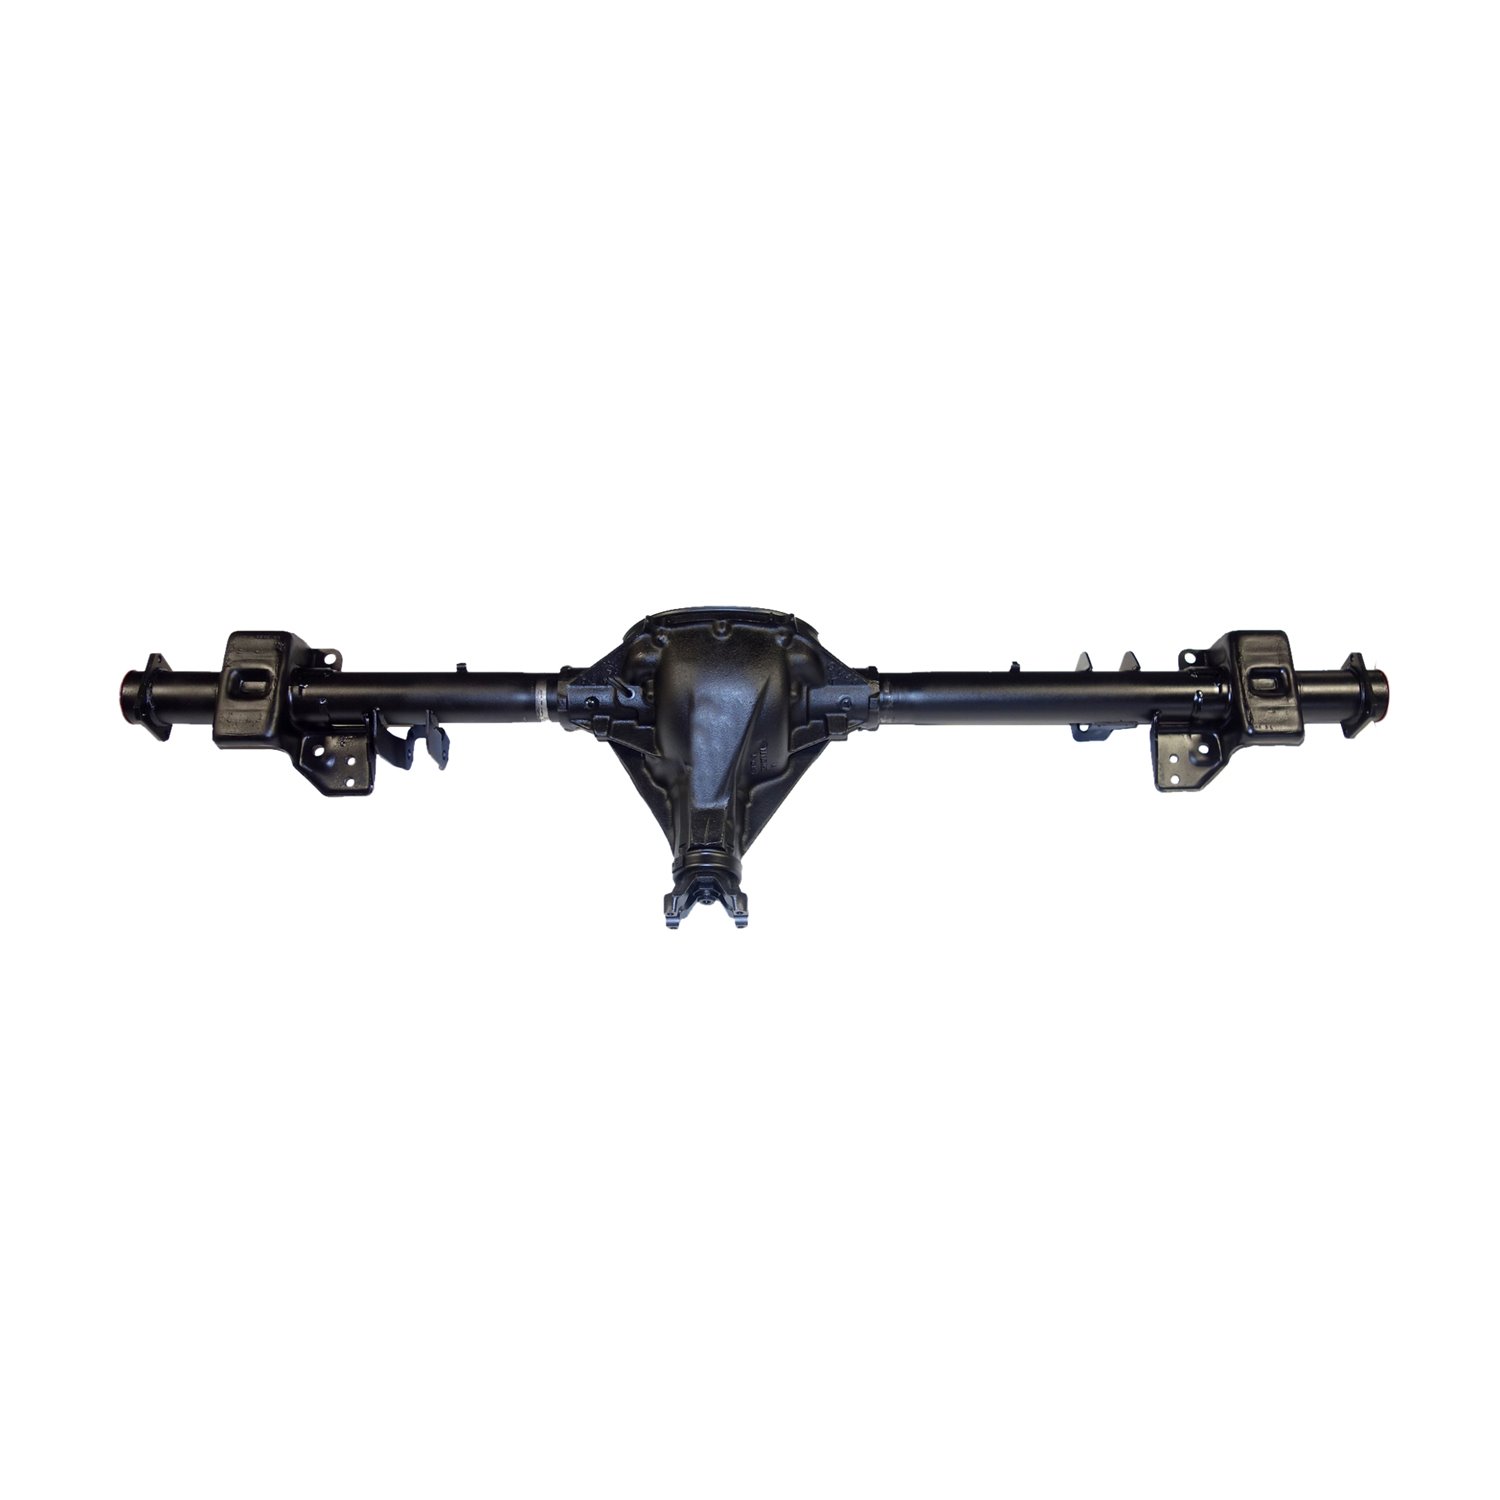 Remanufactured Complete Axle Assembly for GM 7.5" 85-95 GMC Astro & Safari Van 3.23 Ratio